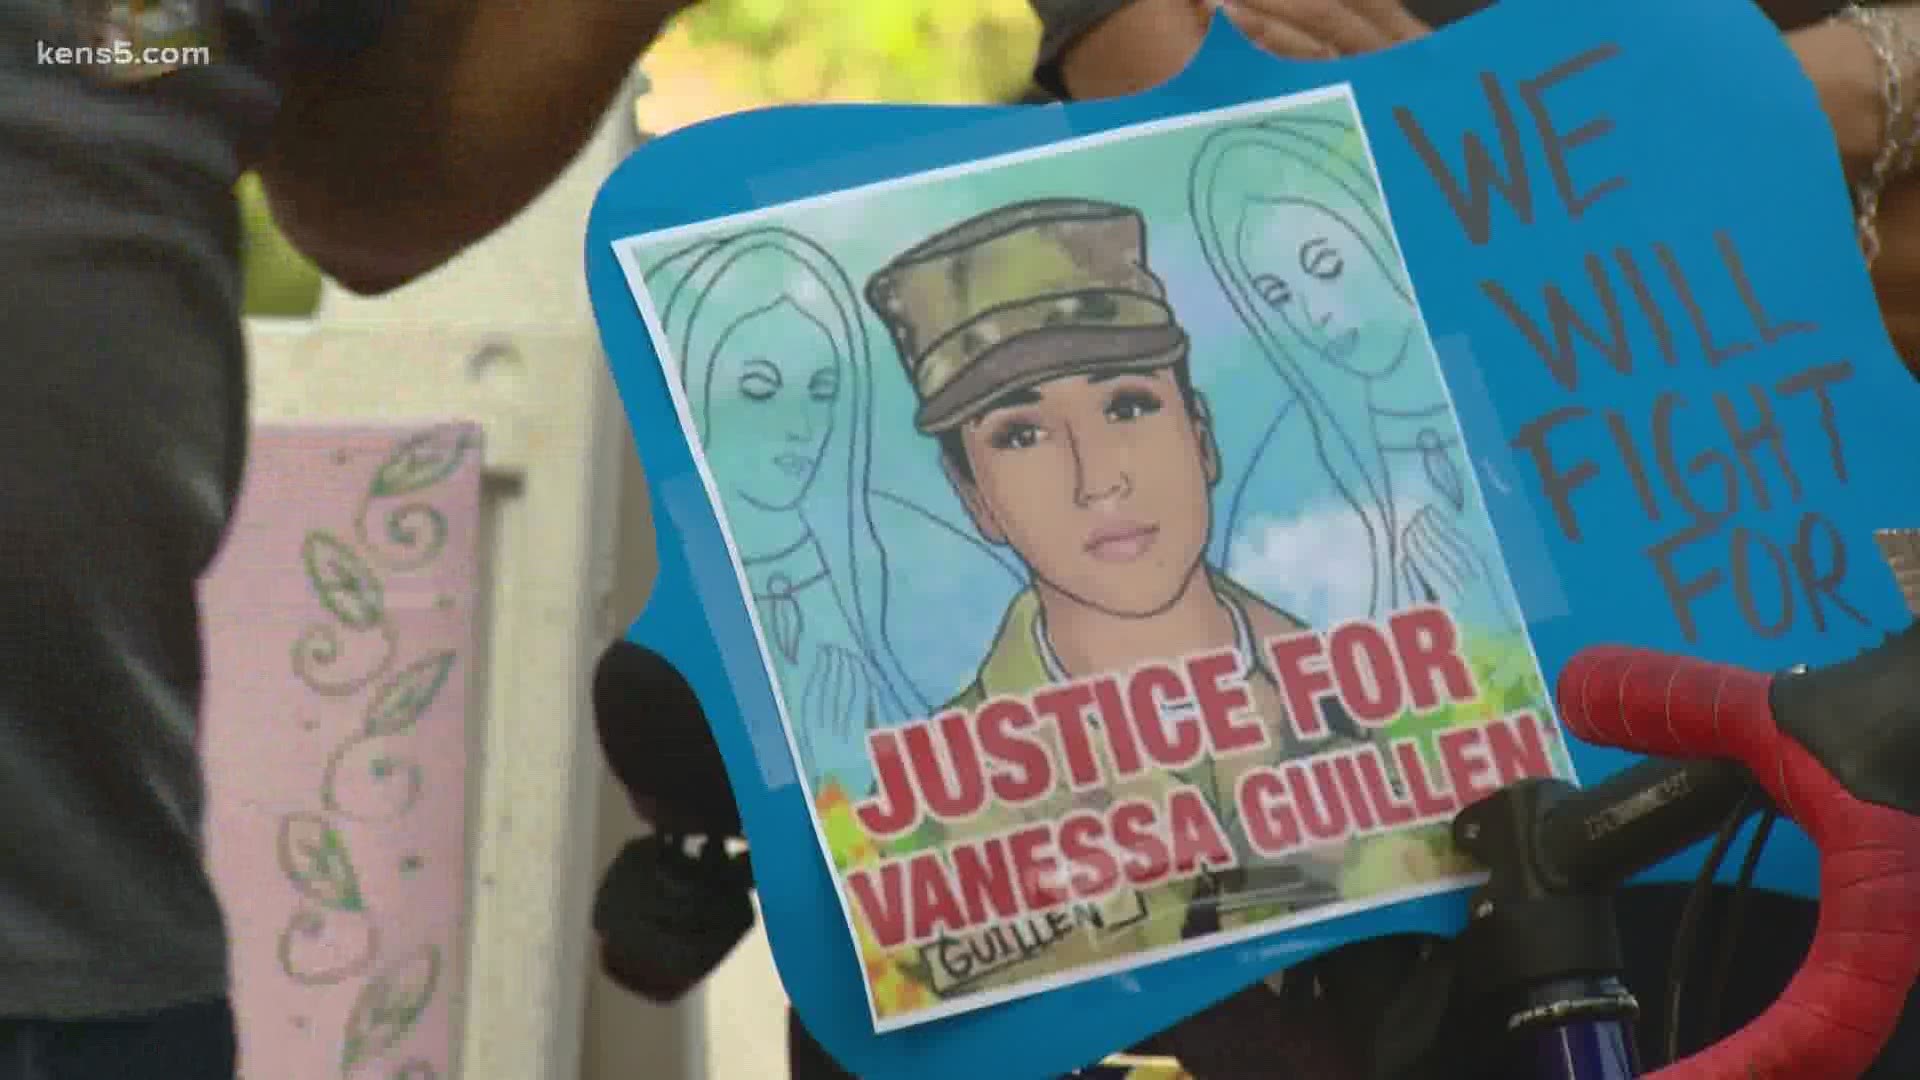 Demonstrators gathered at San Fernando Cathedral to call for accountability. A family attorney confirmed on Sunday that the remains found recently were hers.